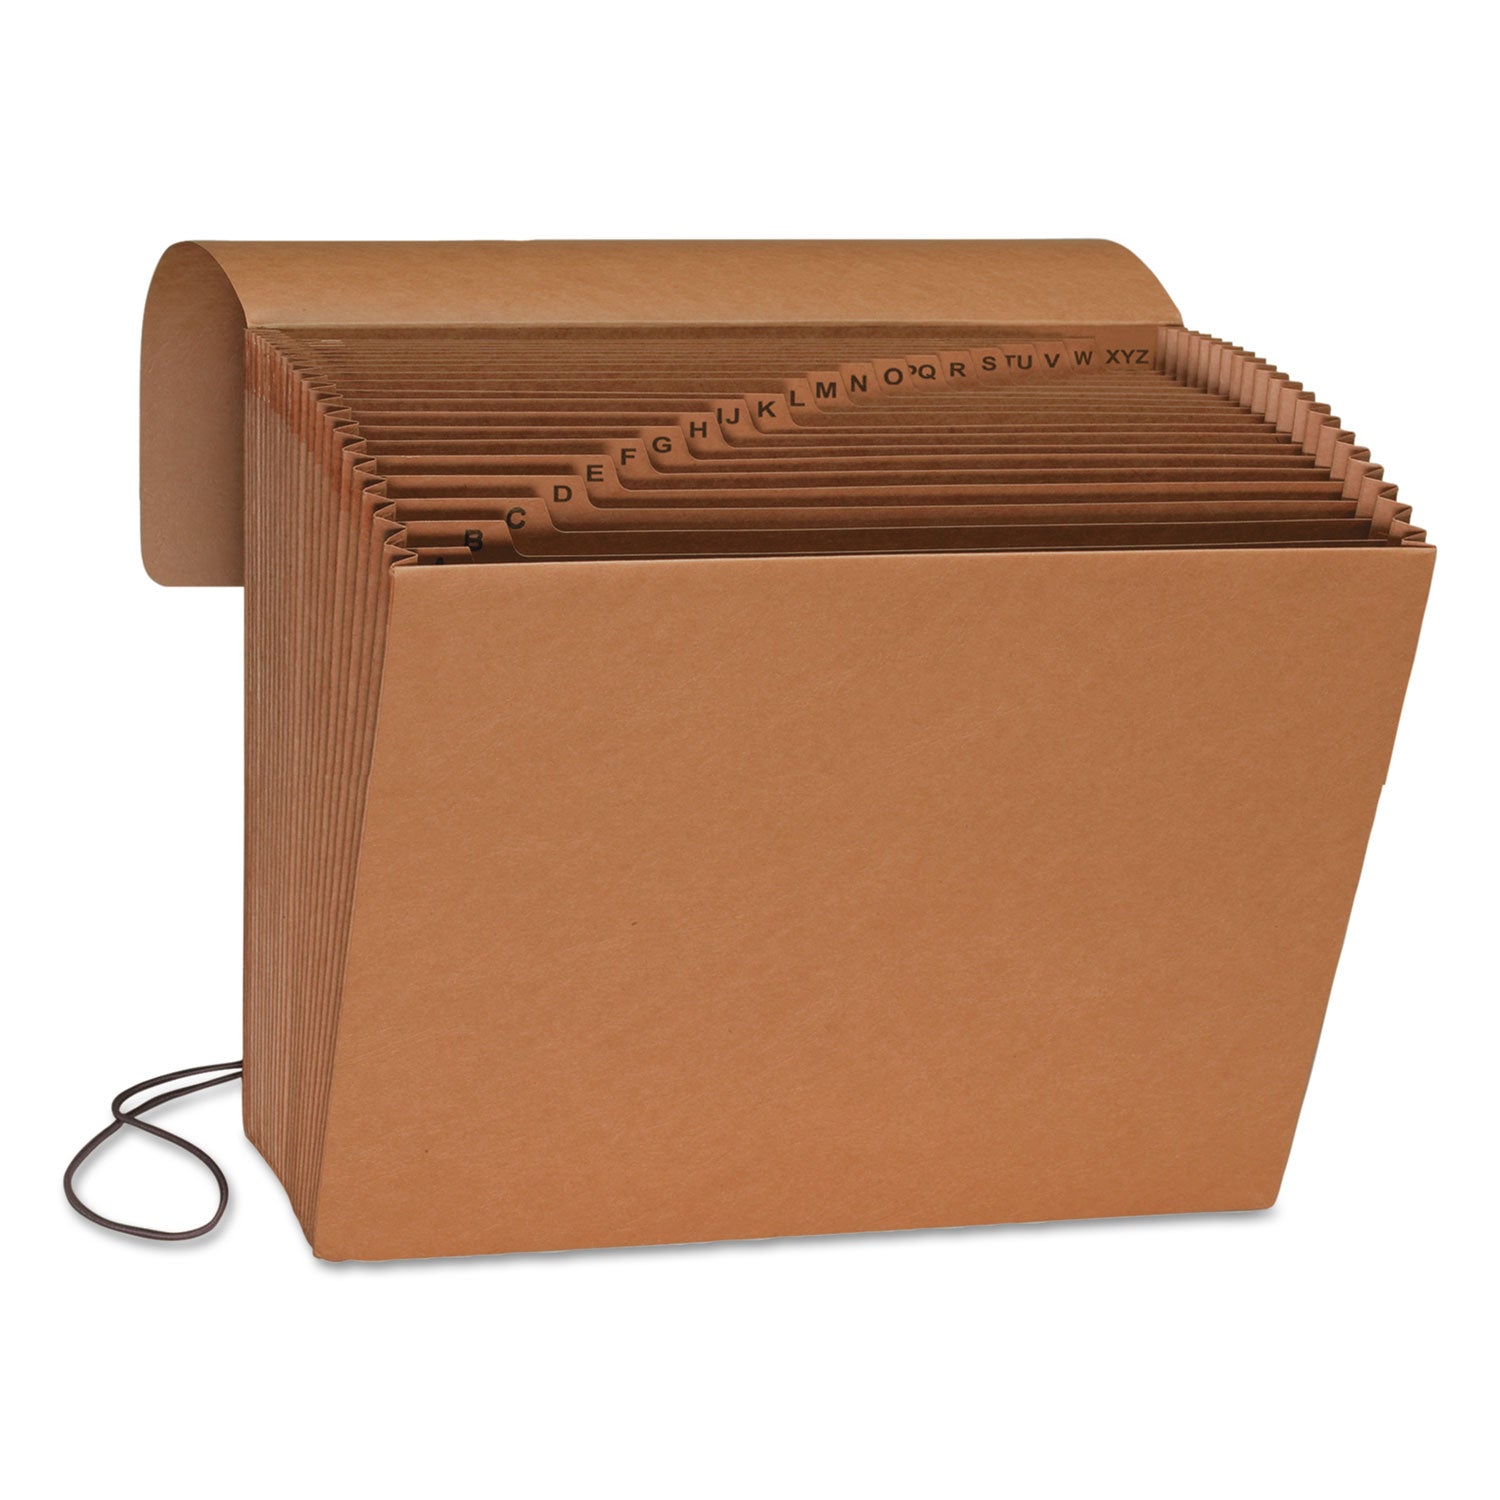 Indexed Expanding Kraft Files, 21 Sections, Elastic Cord Closure, 1/21-Cut Tabs, Letter Size, Kraft - 